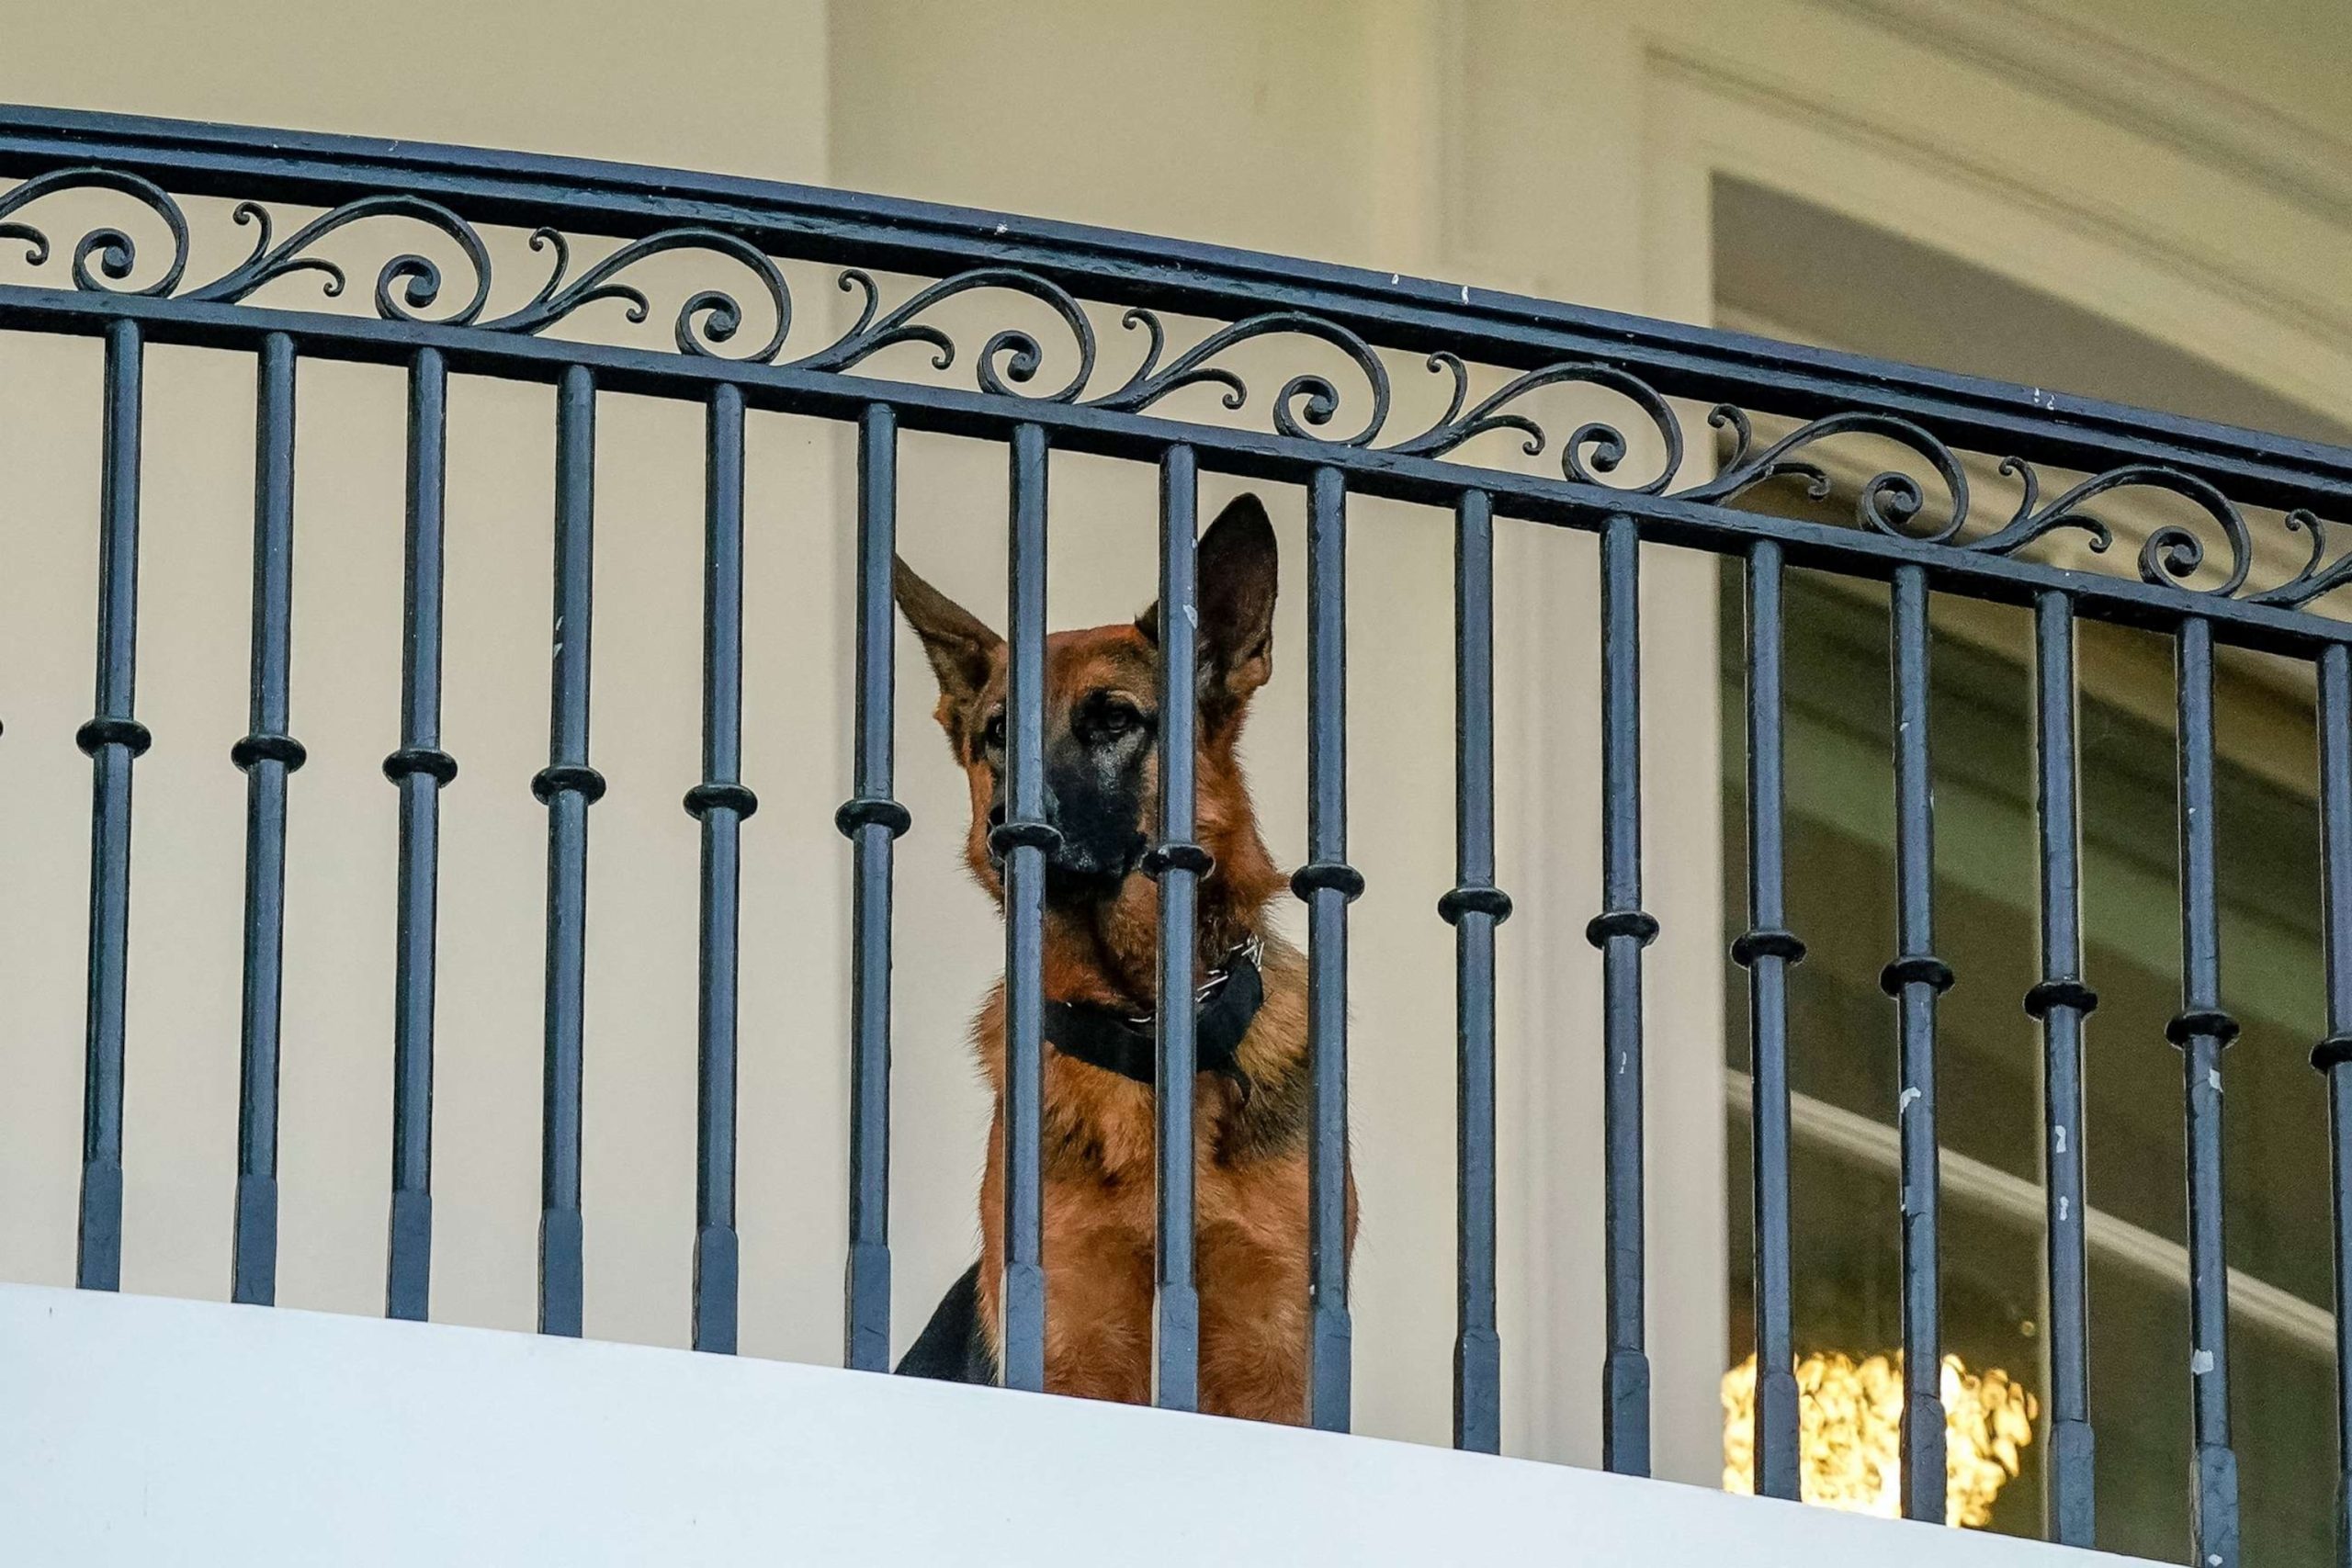 Commander, Bidens' dog, removed from White House following multiple biting incidents